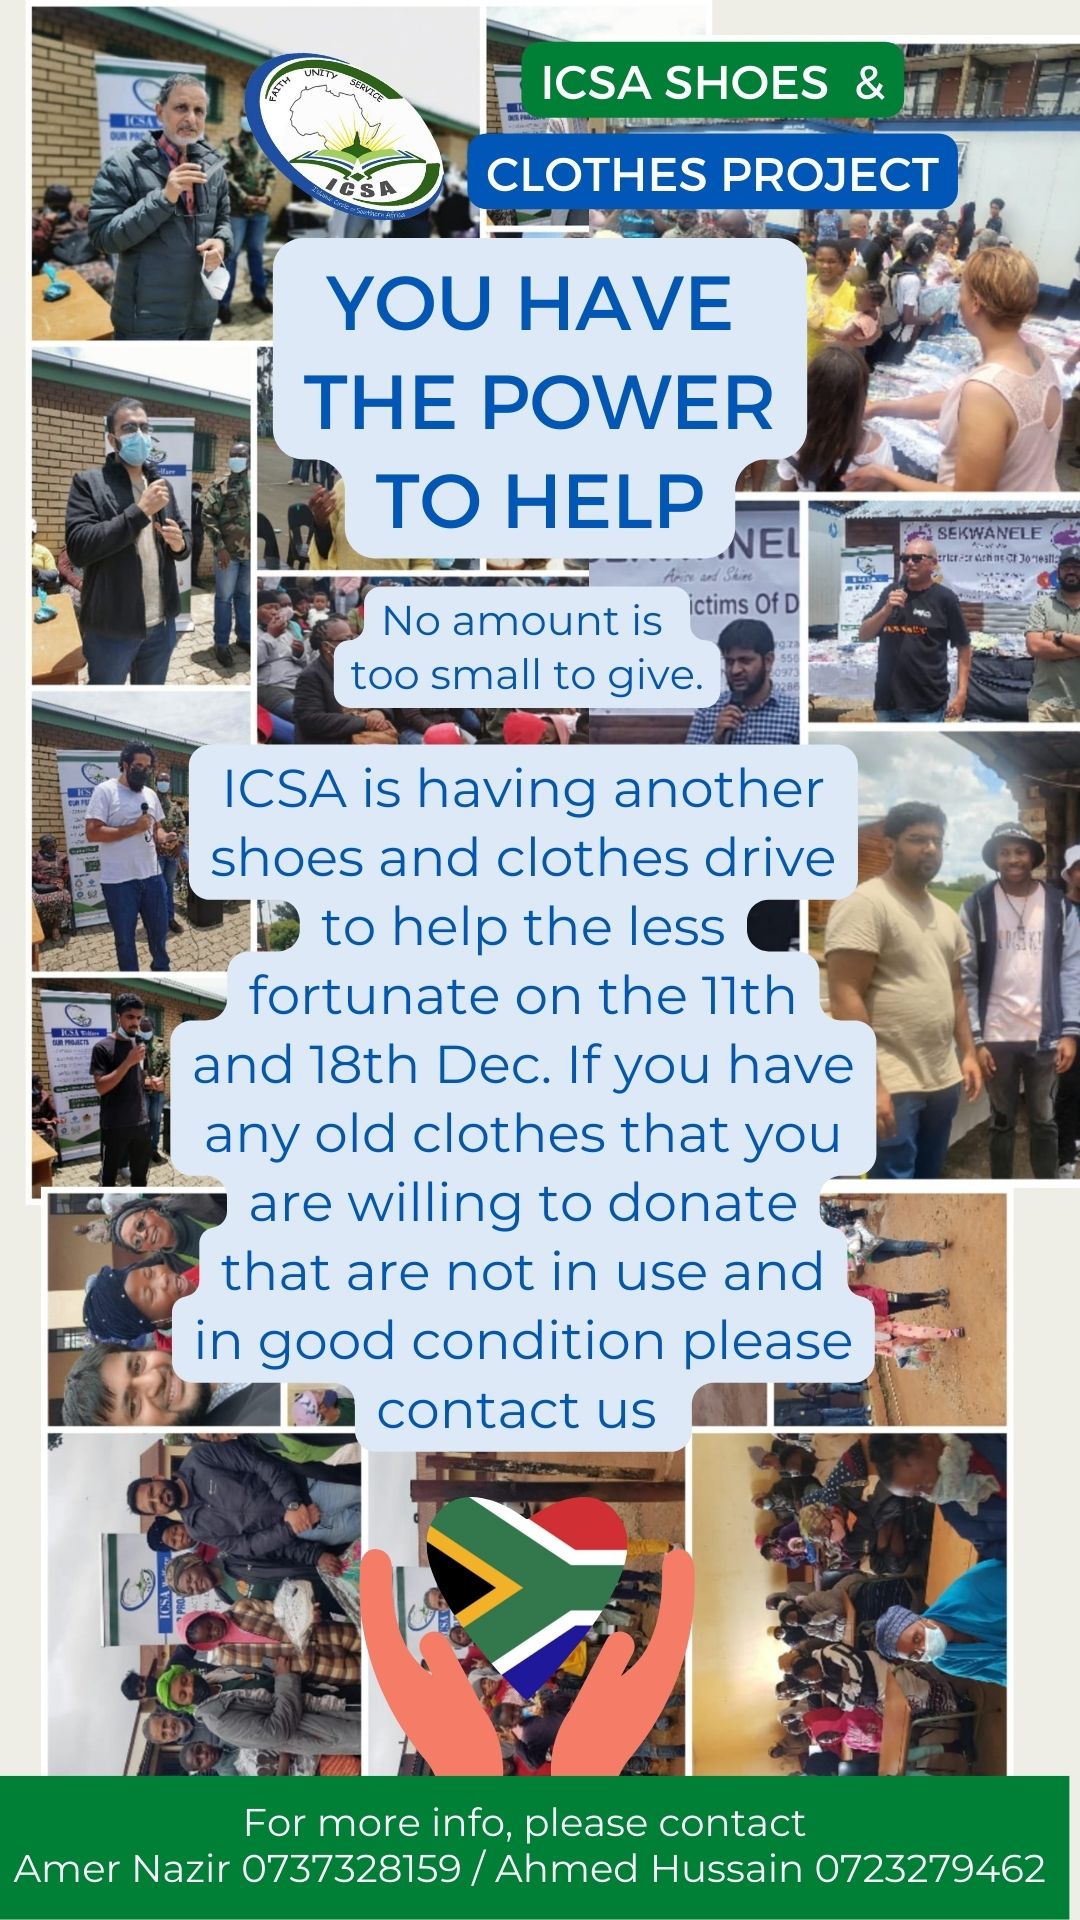 ICSA Shoes and Clothes Project